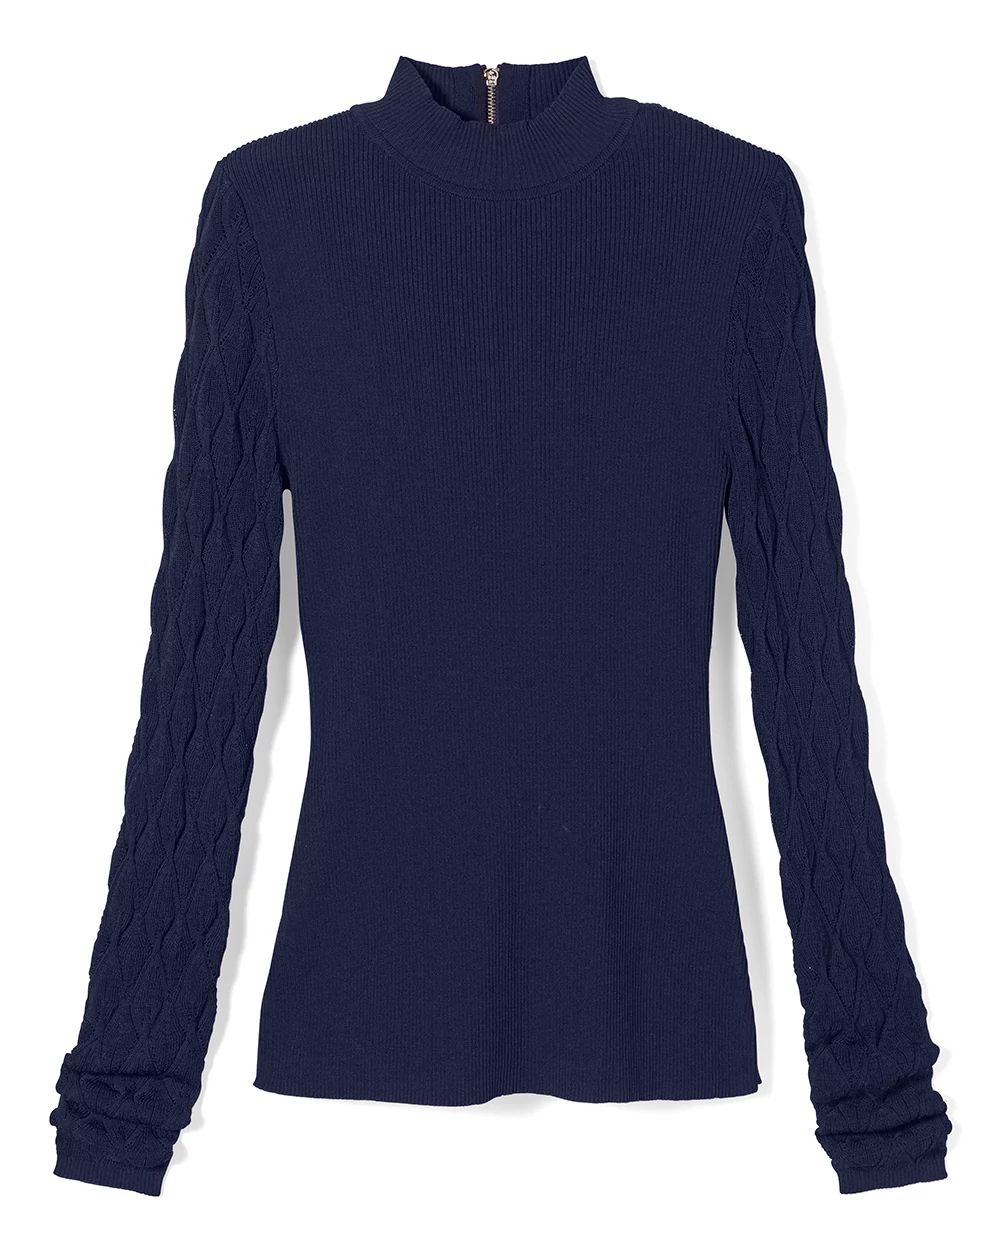 Mock Neck Pointelle Sleeve Sweater click to view larger image.